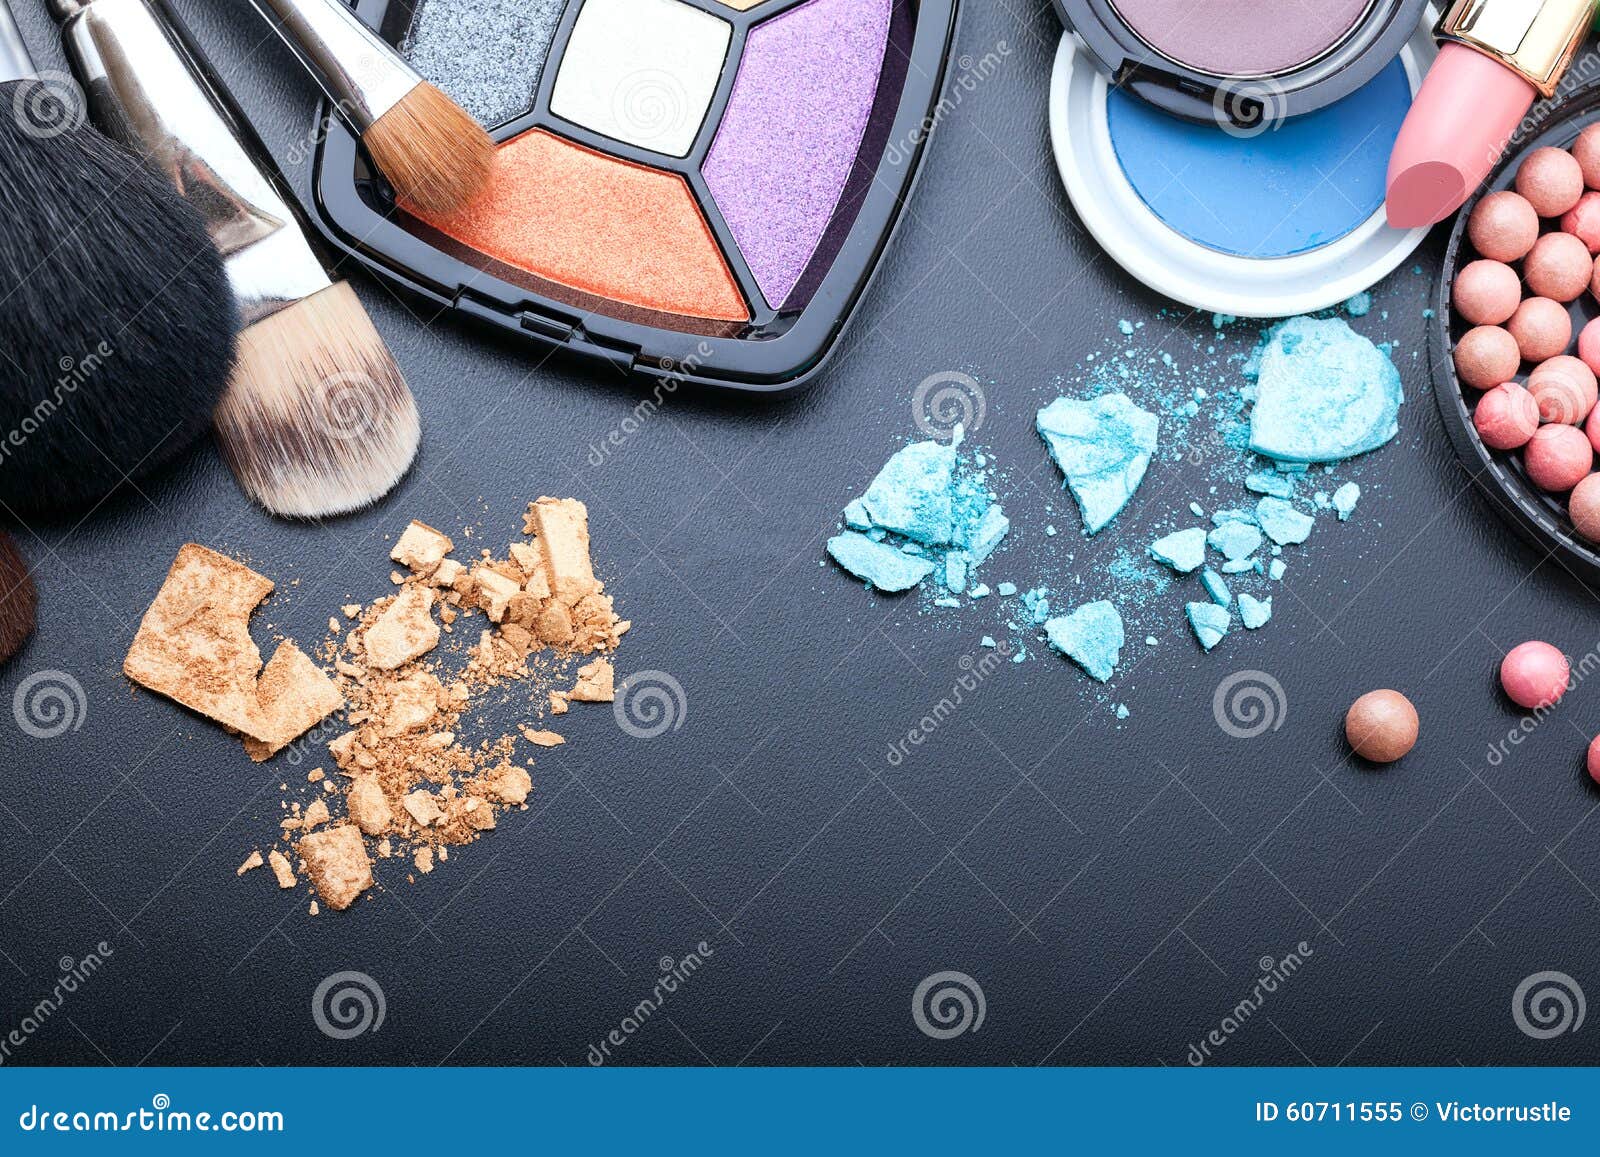 Cosmetics Make Up On Black Background Top View Mock Up Stock Image